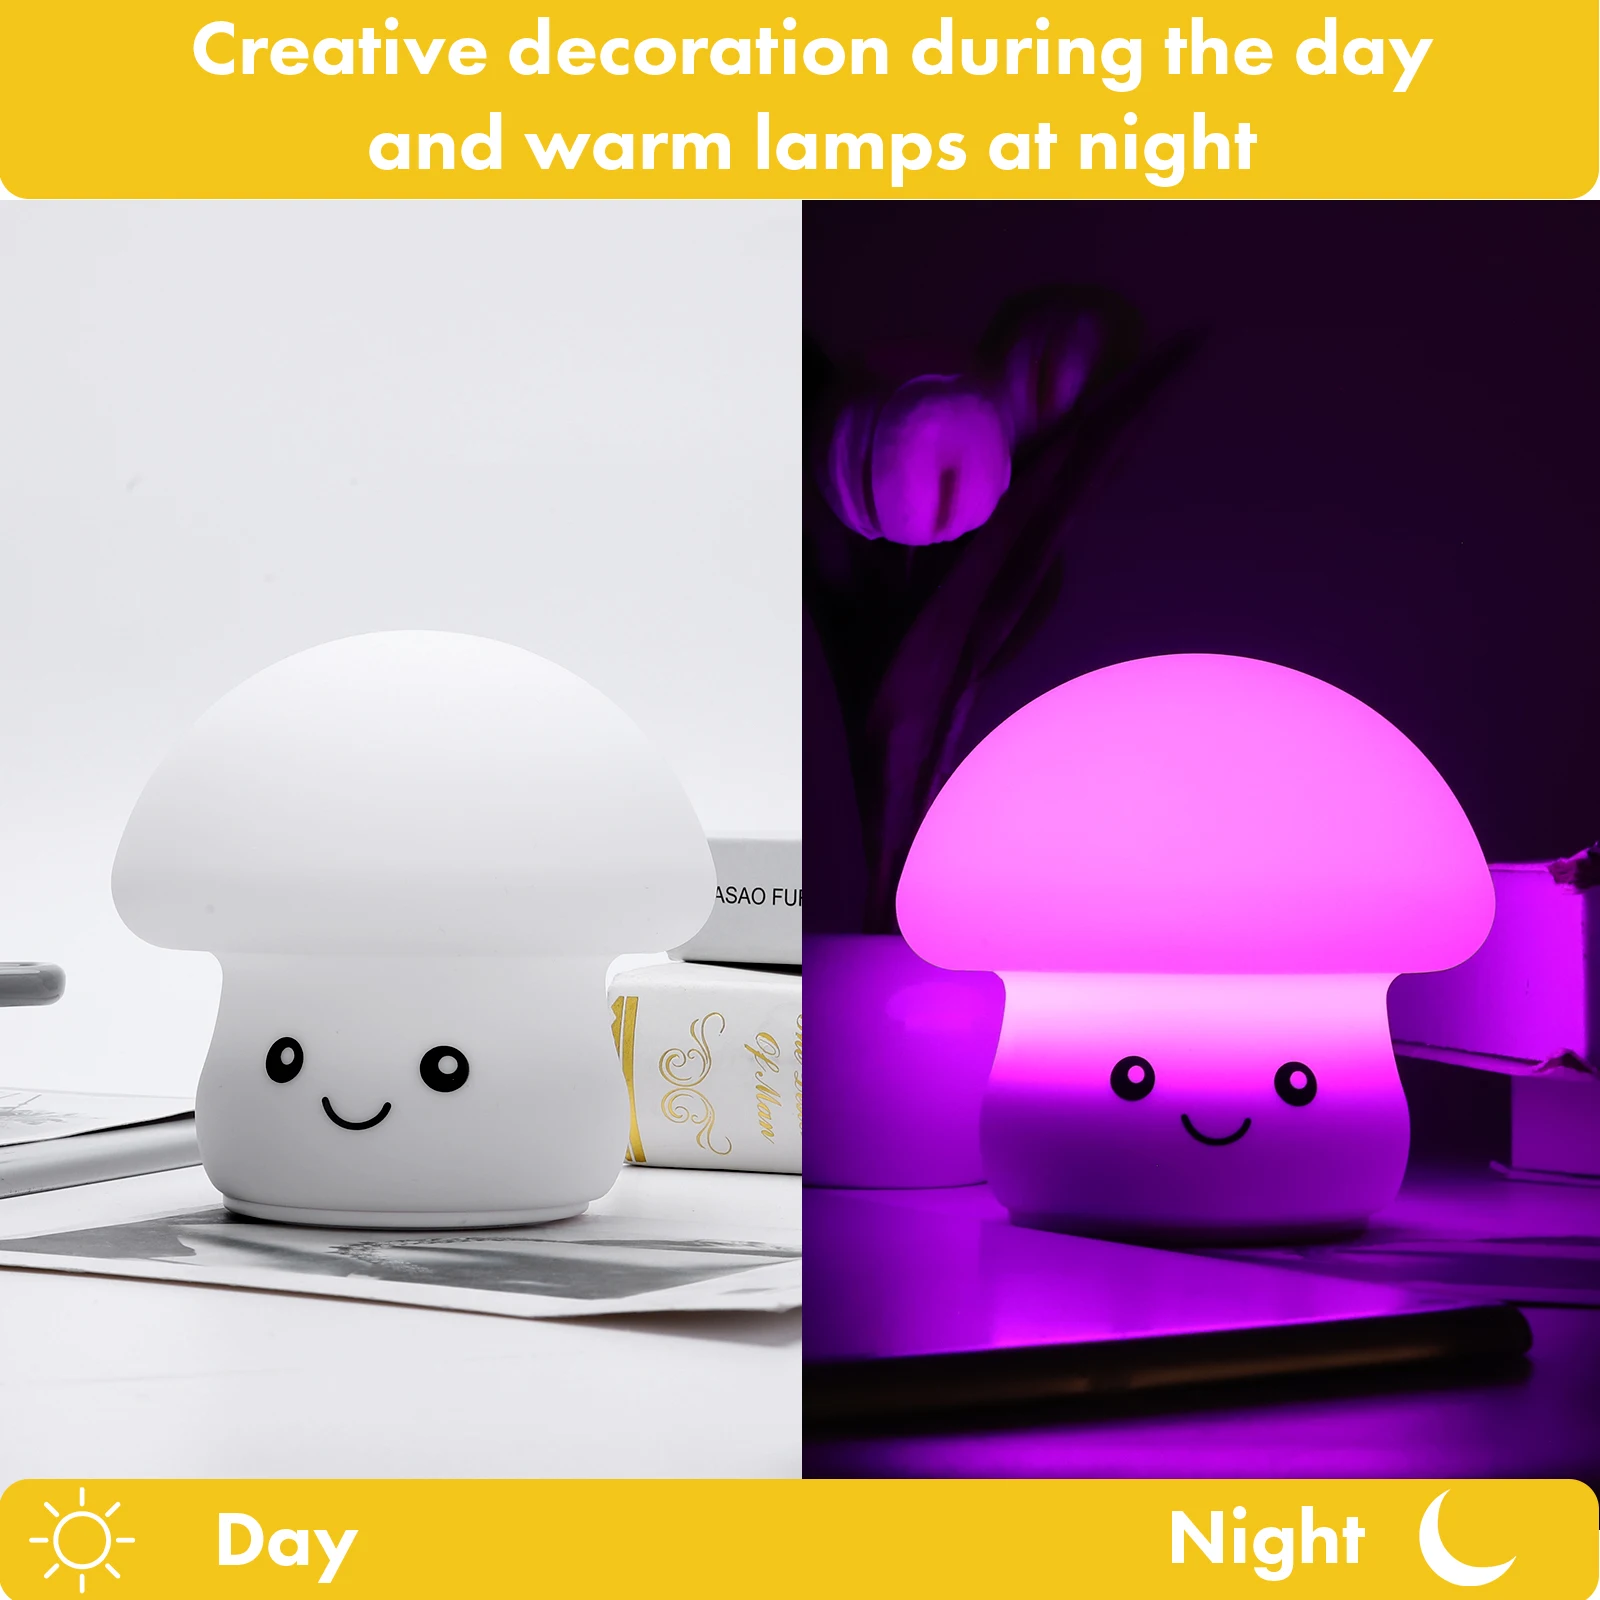 

Mushroom Atmosphere Light 1200mAh USB Touch Garden Decorative Lamp Dimmable with Remote 7 Color Changing for Office Dorm Study